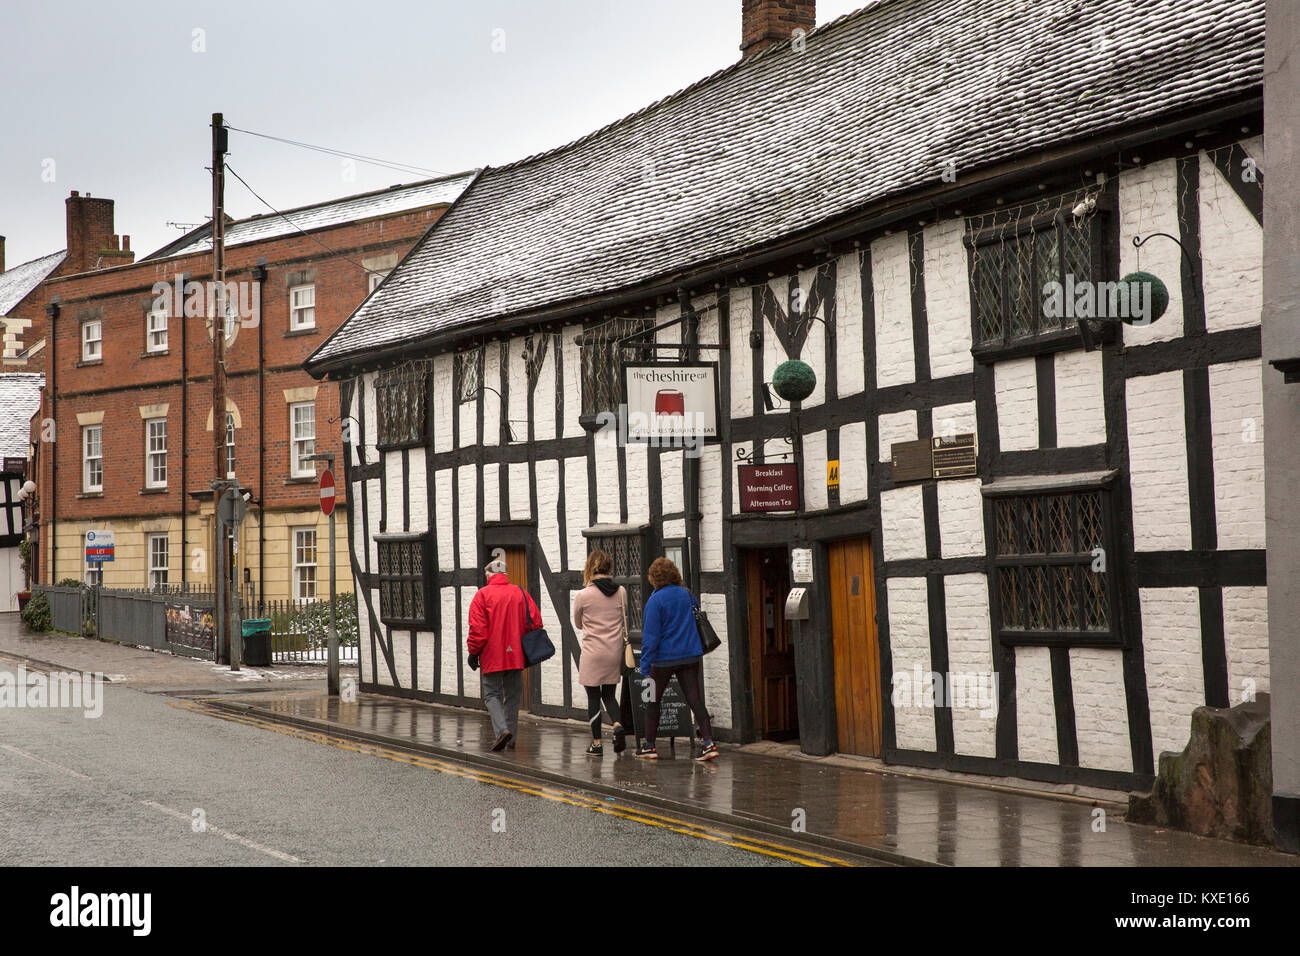 UK, England, Cheshire, Nantwich, Welsh Row, Cheshire Cat Inn, old half timbered former Widows Alms houses in winter Stock Photo